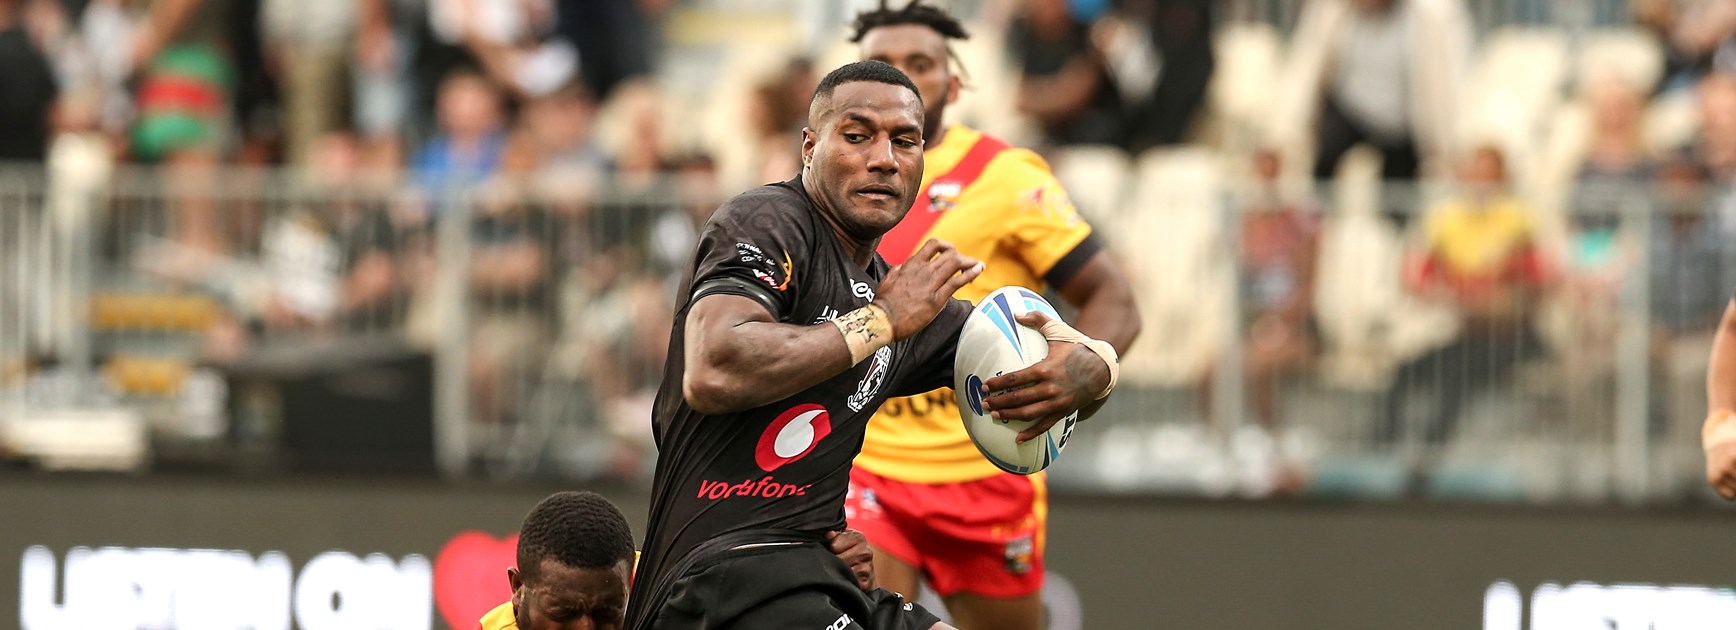 Vunivalu signing raises questions about rugby recruitment tactics